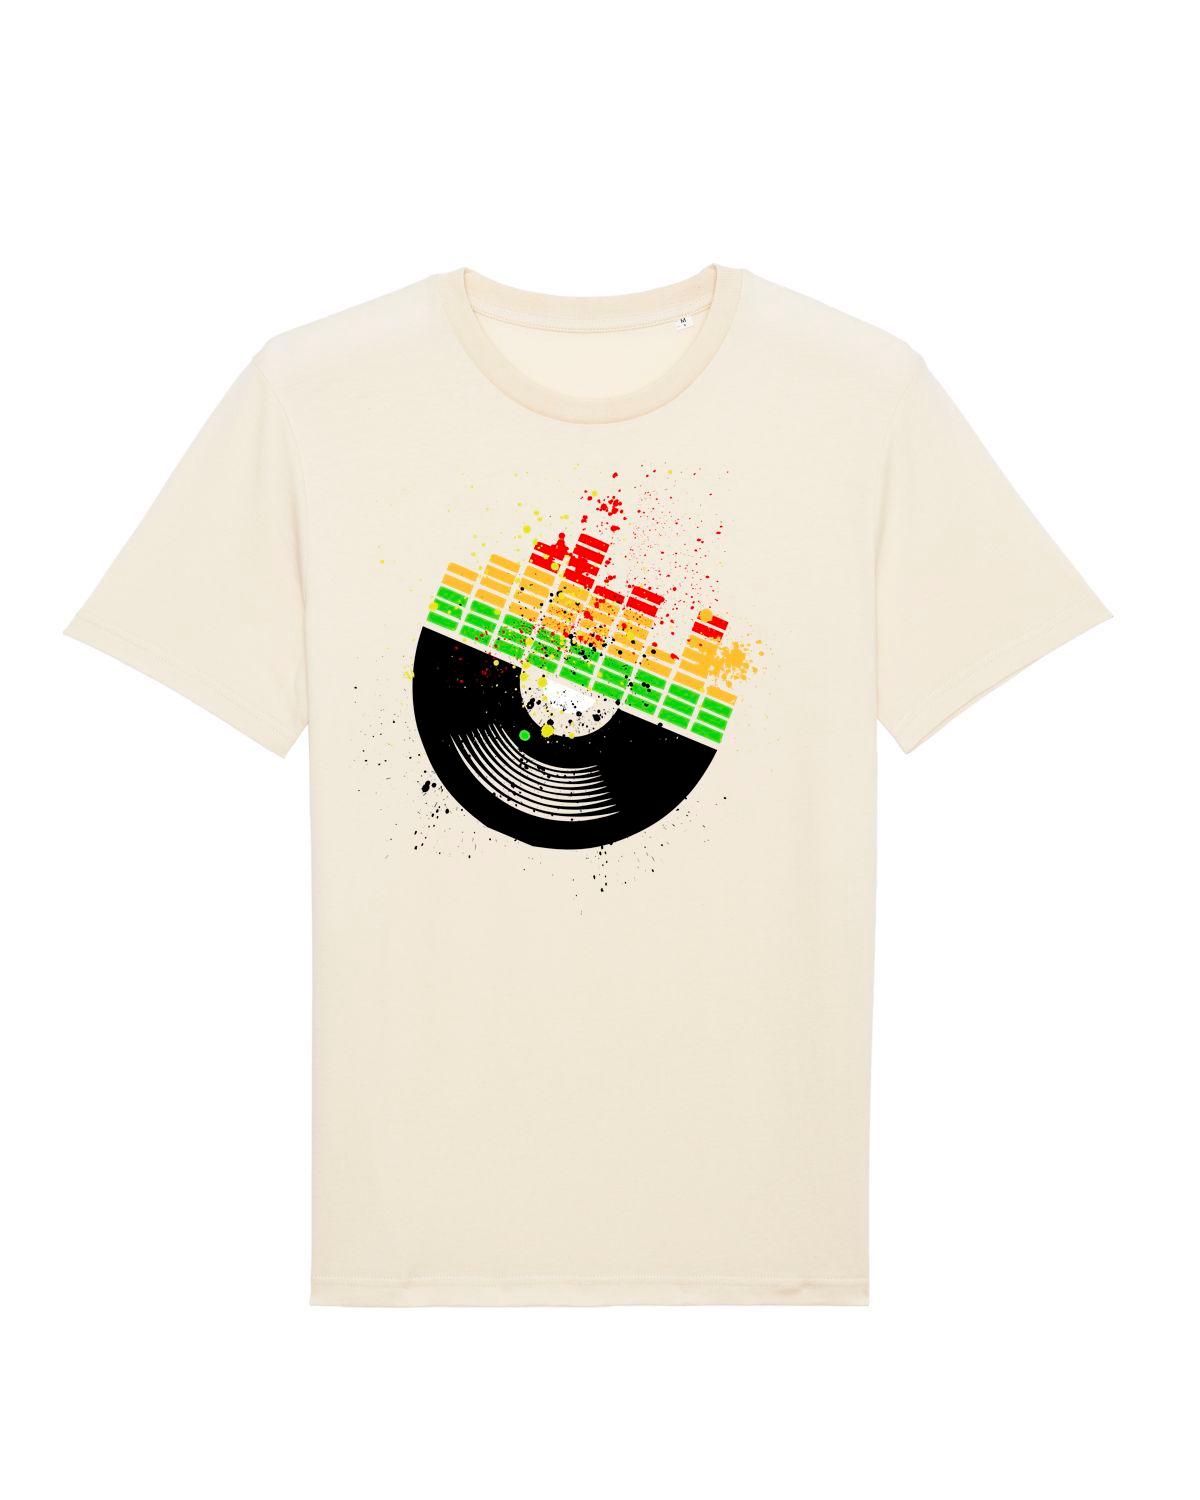 PUMP UP THE VOLUMN: T-Shirt Inspired by DJs and Clubbing (3 Colours) - Suit Yourself Music